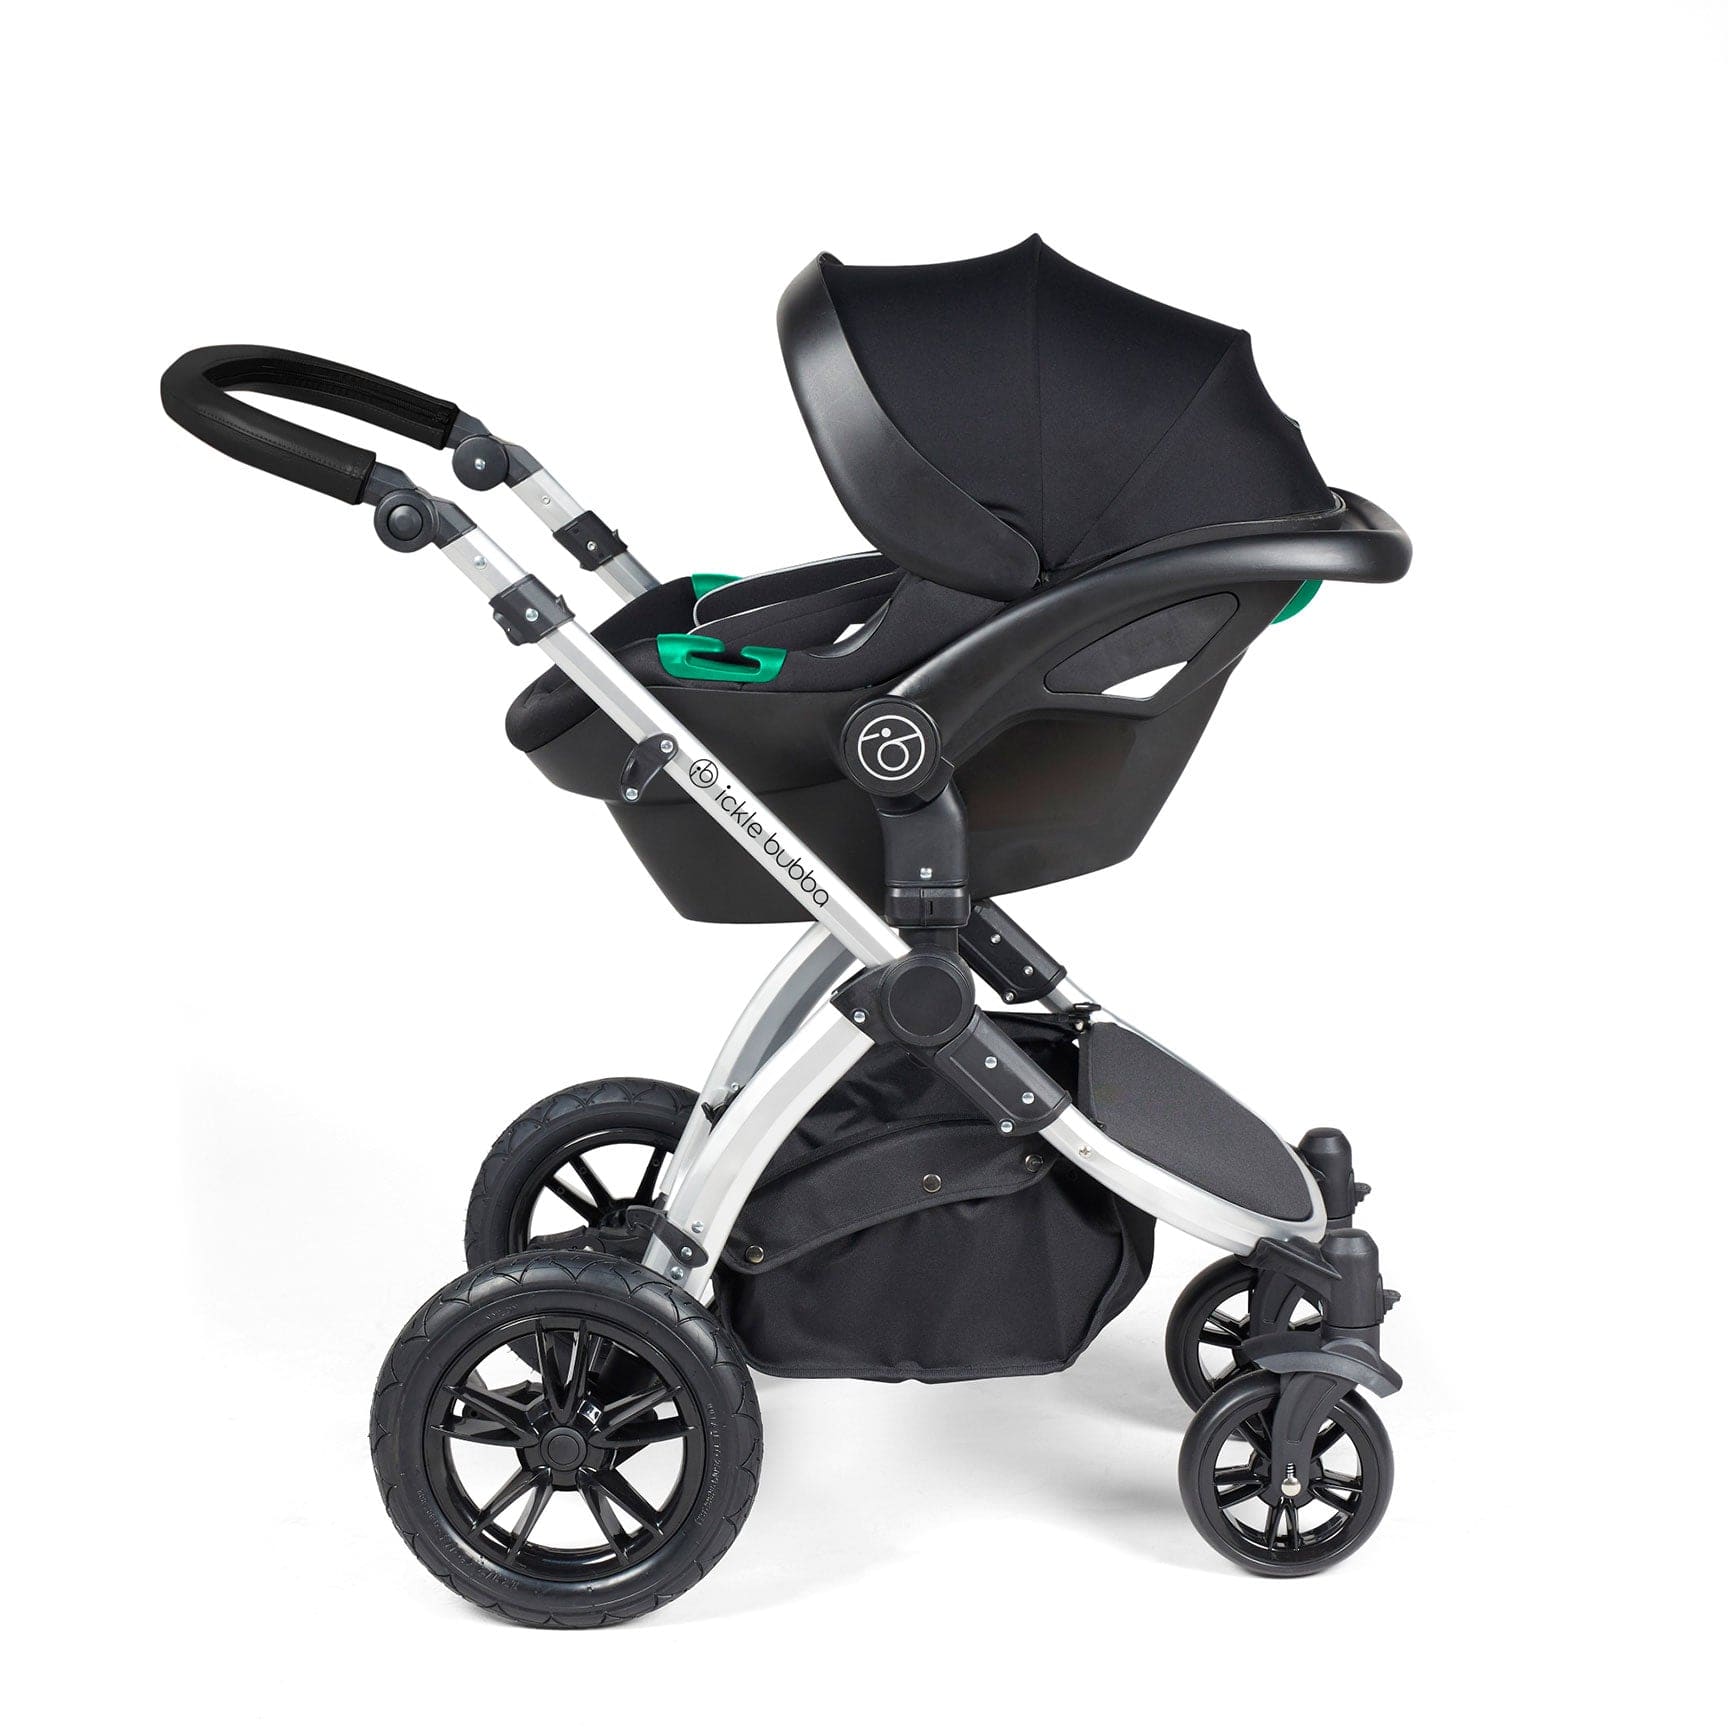 Ickle Bubba Stomp Luxe All-in-One Travel System with Isofix Base in Silver/Desert/Black Travel Systems 10-011-300-257 5056515026597